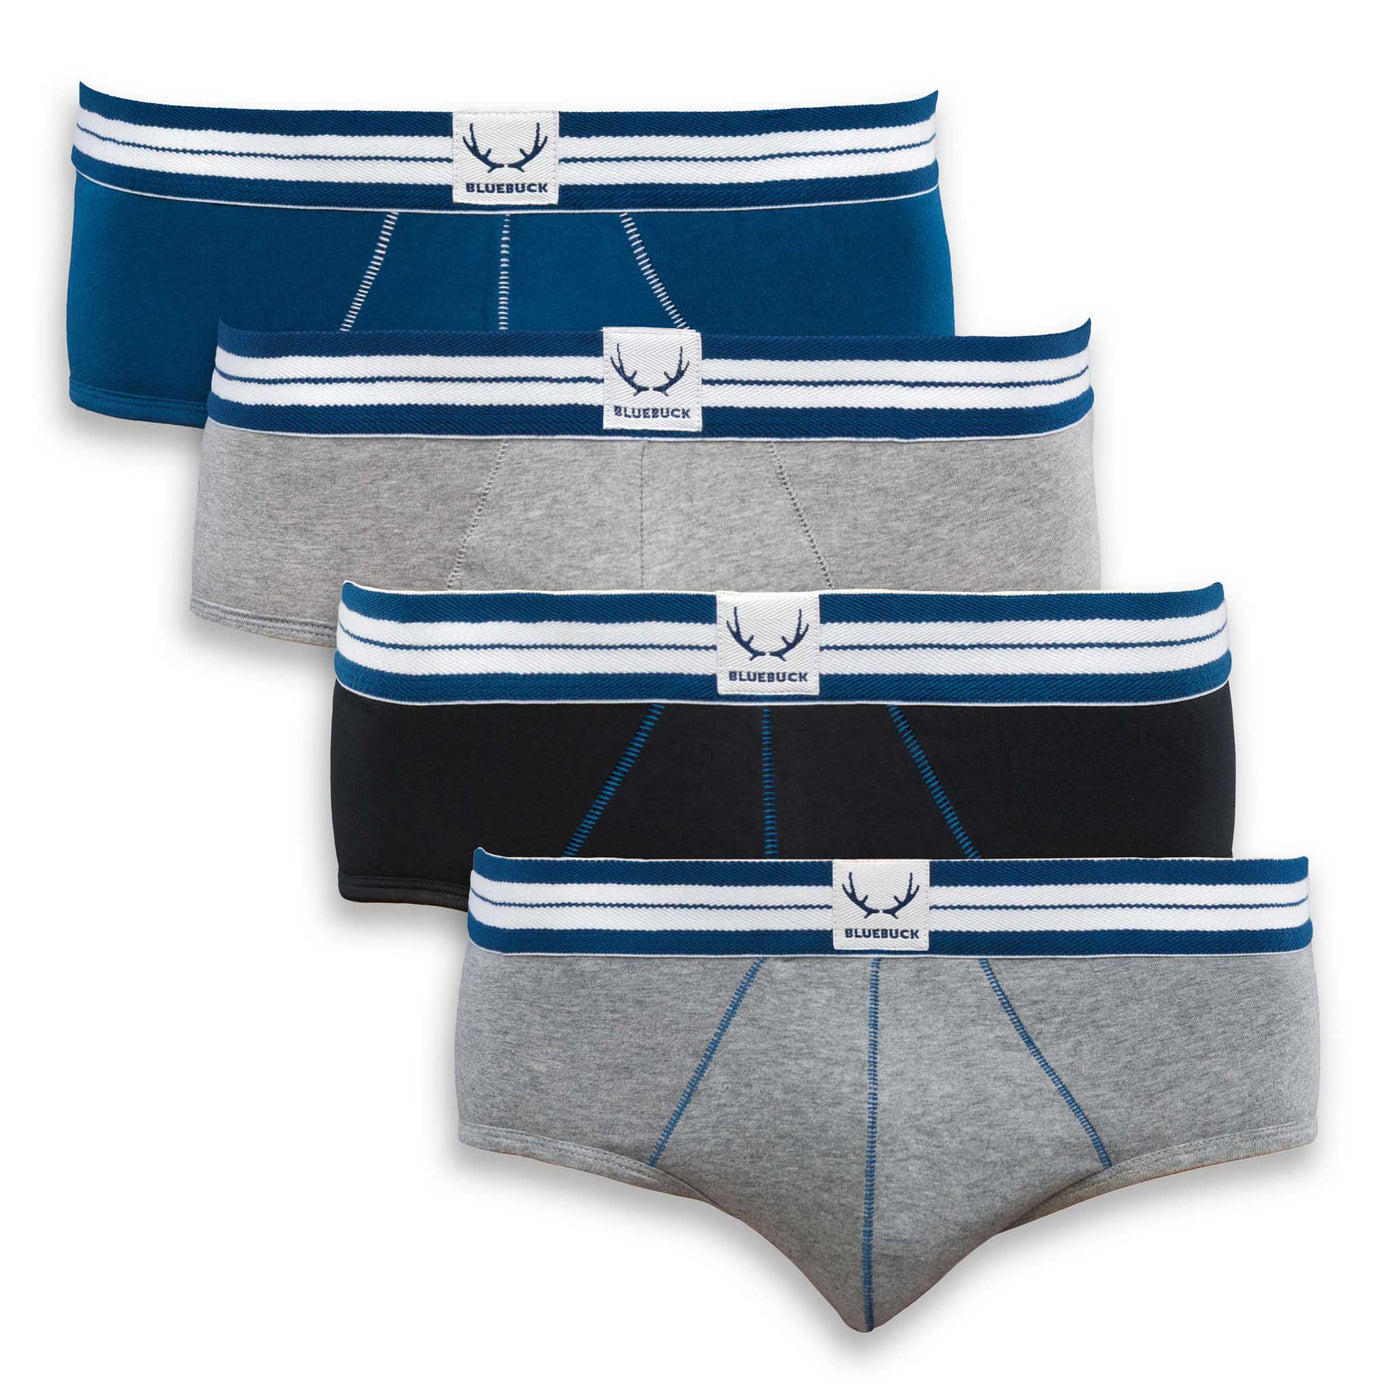 4 classic briefs for men in organic cotton, blue, black and grey